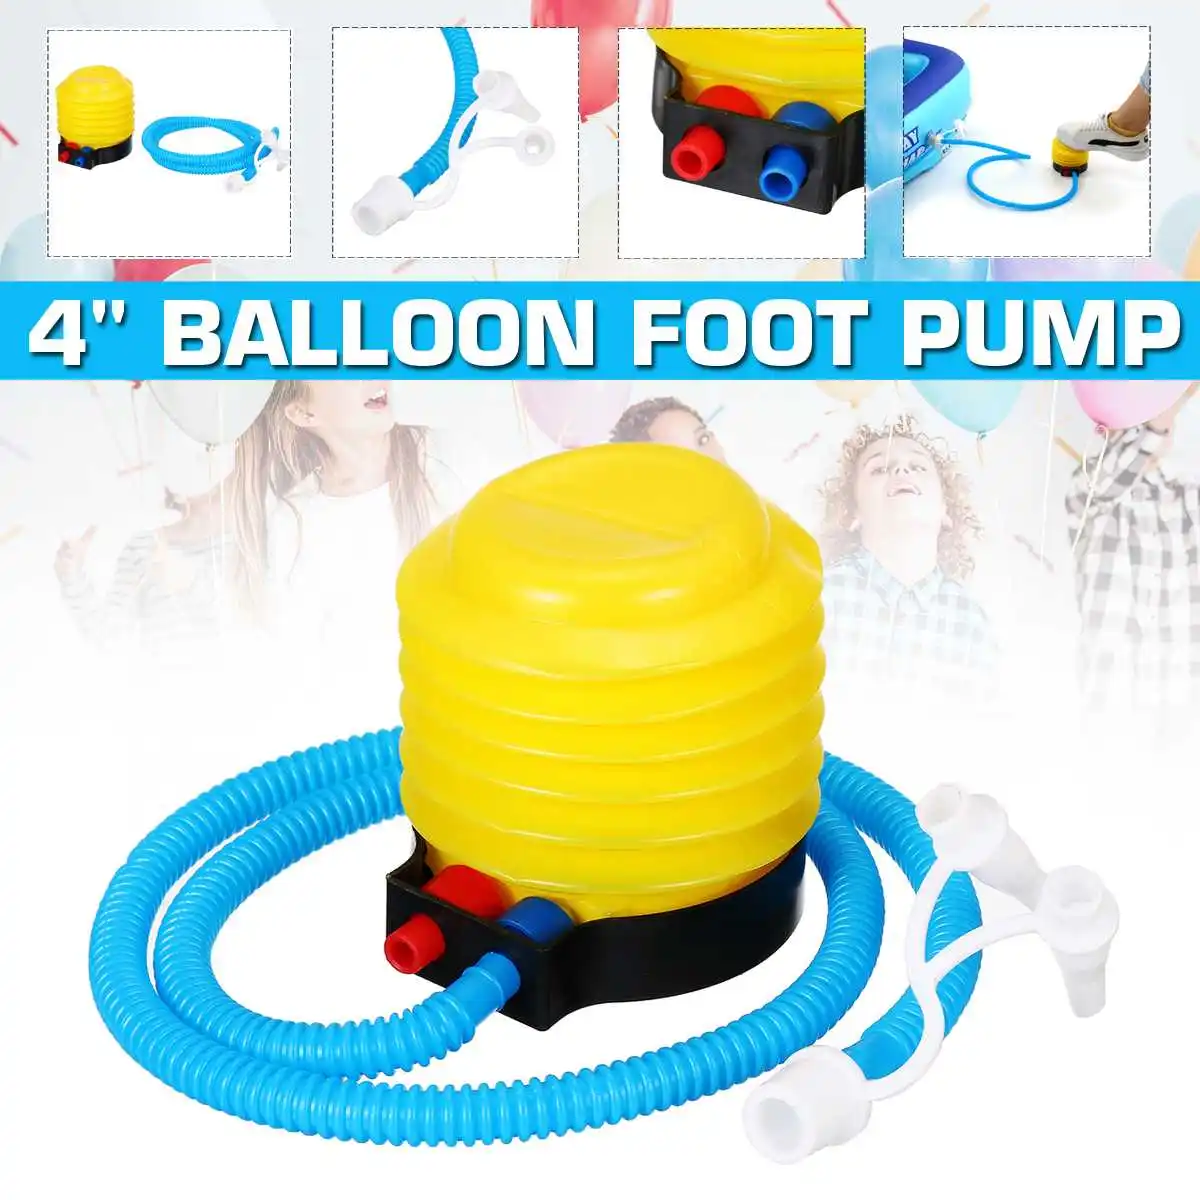 pools exercise balls etc. Foot/manual pump for inflatable air beds toys 